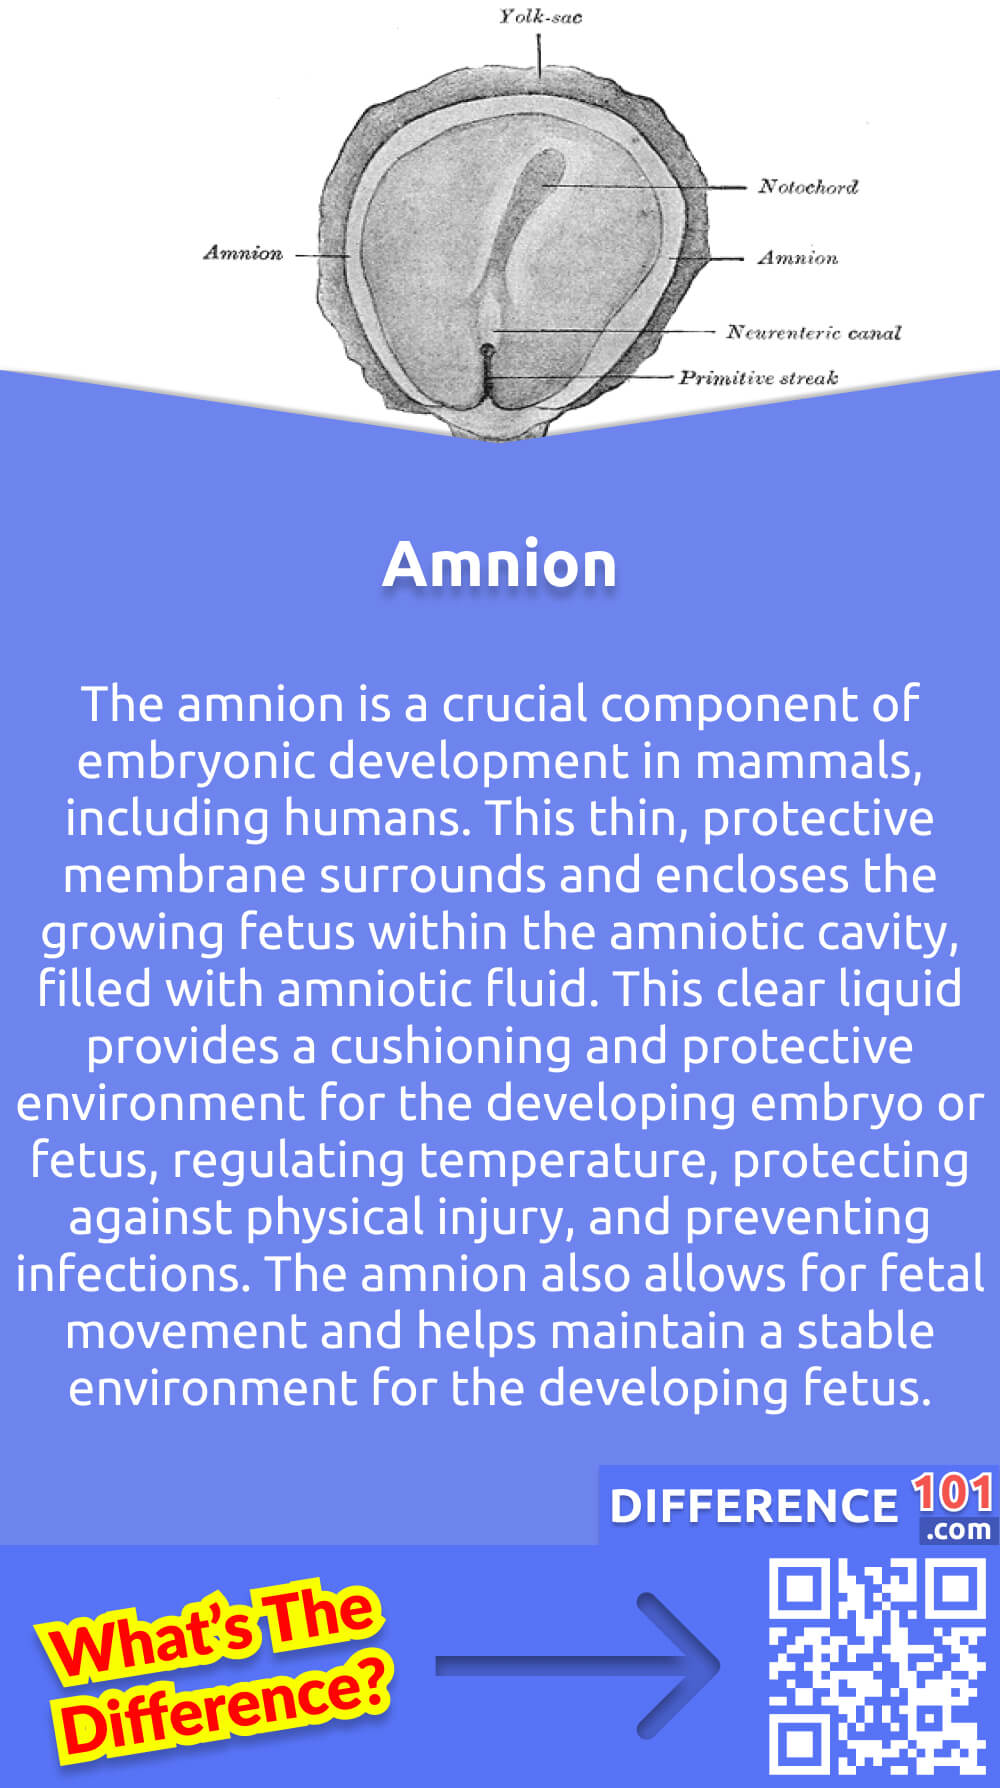 What Is Amnion? The amnion is a crucial component of embryonic development in mammals, including humans. This thin, protective membrane surrounds and encloses the growing fetus within the amniotic cavity, filled with amniotic fluid. This clear liquid provides a cushioning and protective environment for the developing embryo or fetus, regulating temperature, protecting against physical injury, and preventing infections. The amnion also allows for fetal movement and helps maintain a stable environment for the developing fetus. During labor, the amnion ruptures, commonly known as the "water breaking," which signals the onset of childbirth. Overall, the amnion is a vital part of fetal development, ensuring the survival and well-being of the growing fetus.